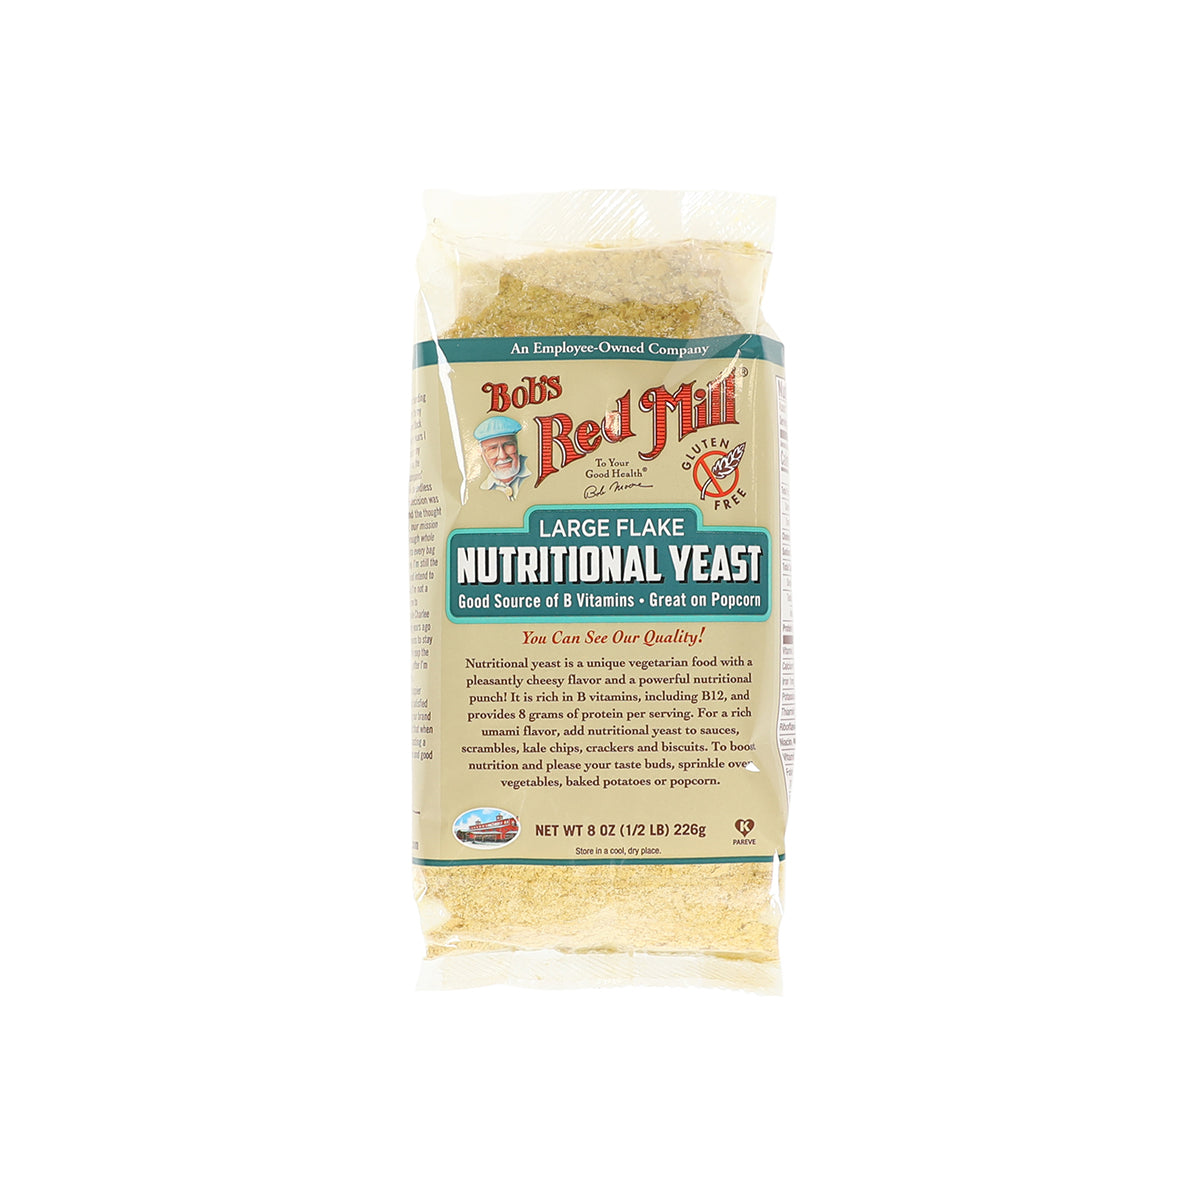 Bob'S Red Mill Nutritional Yeast Bag